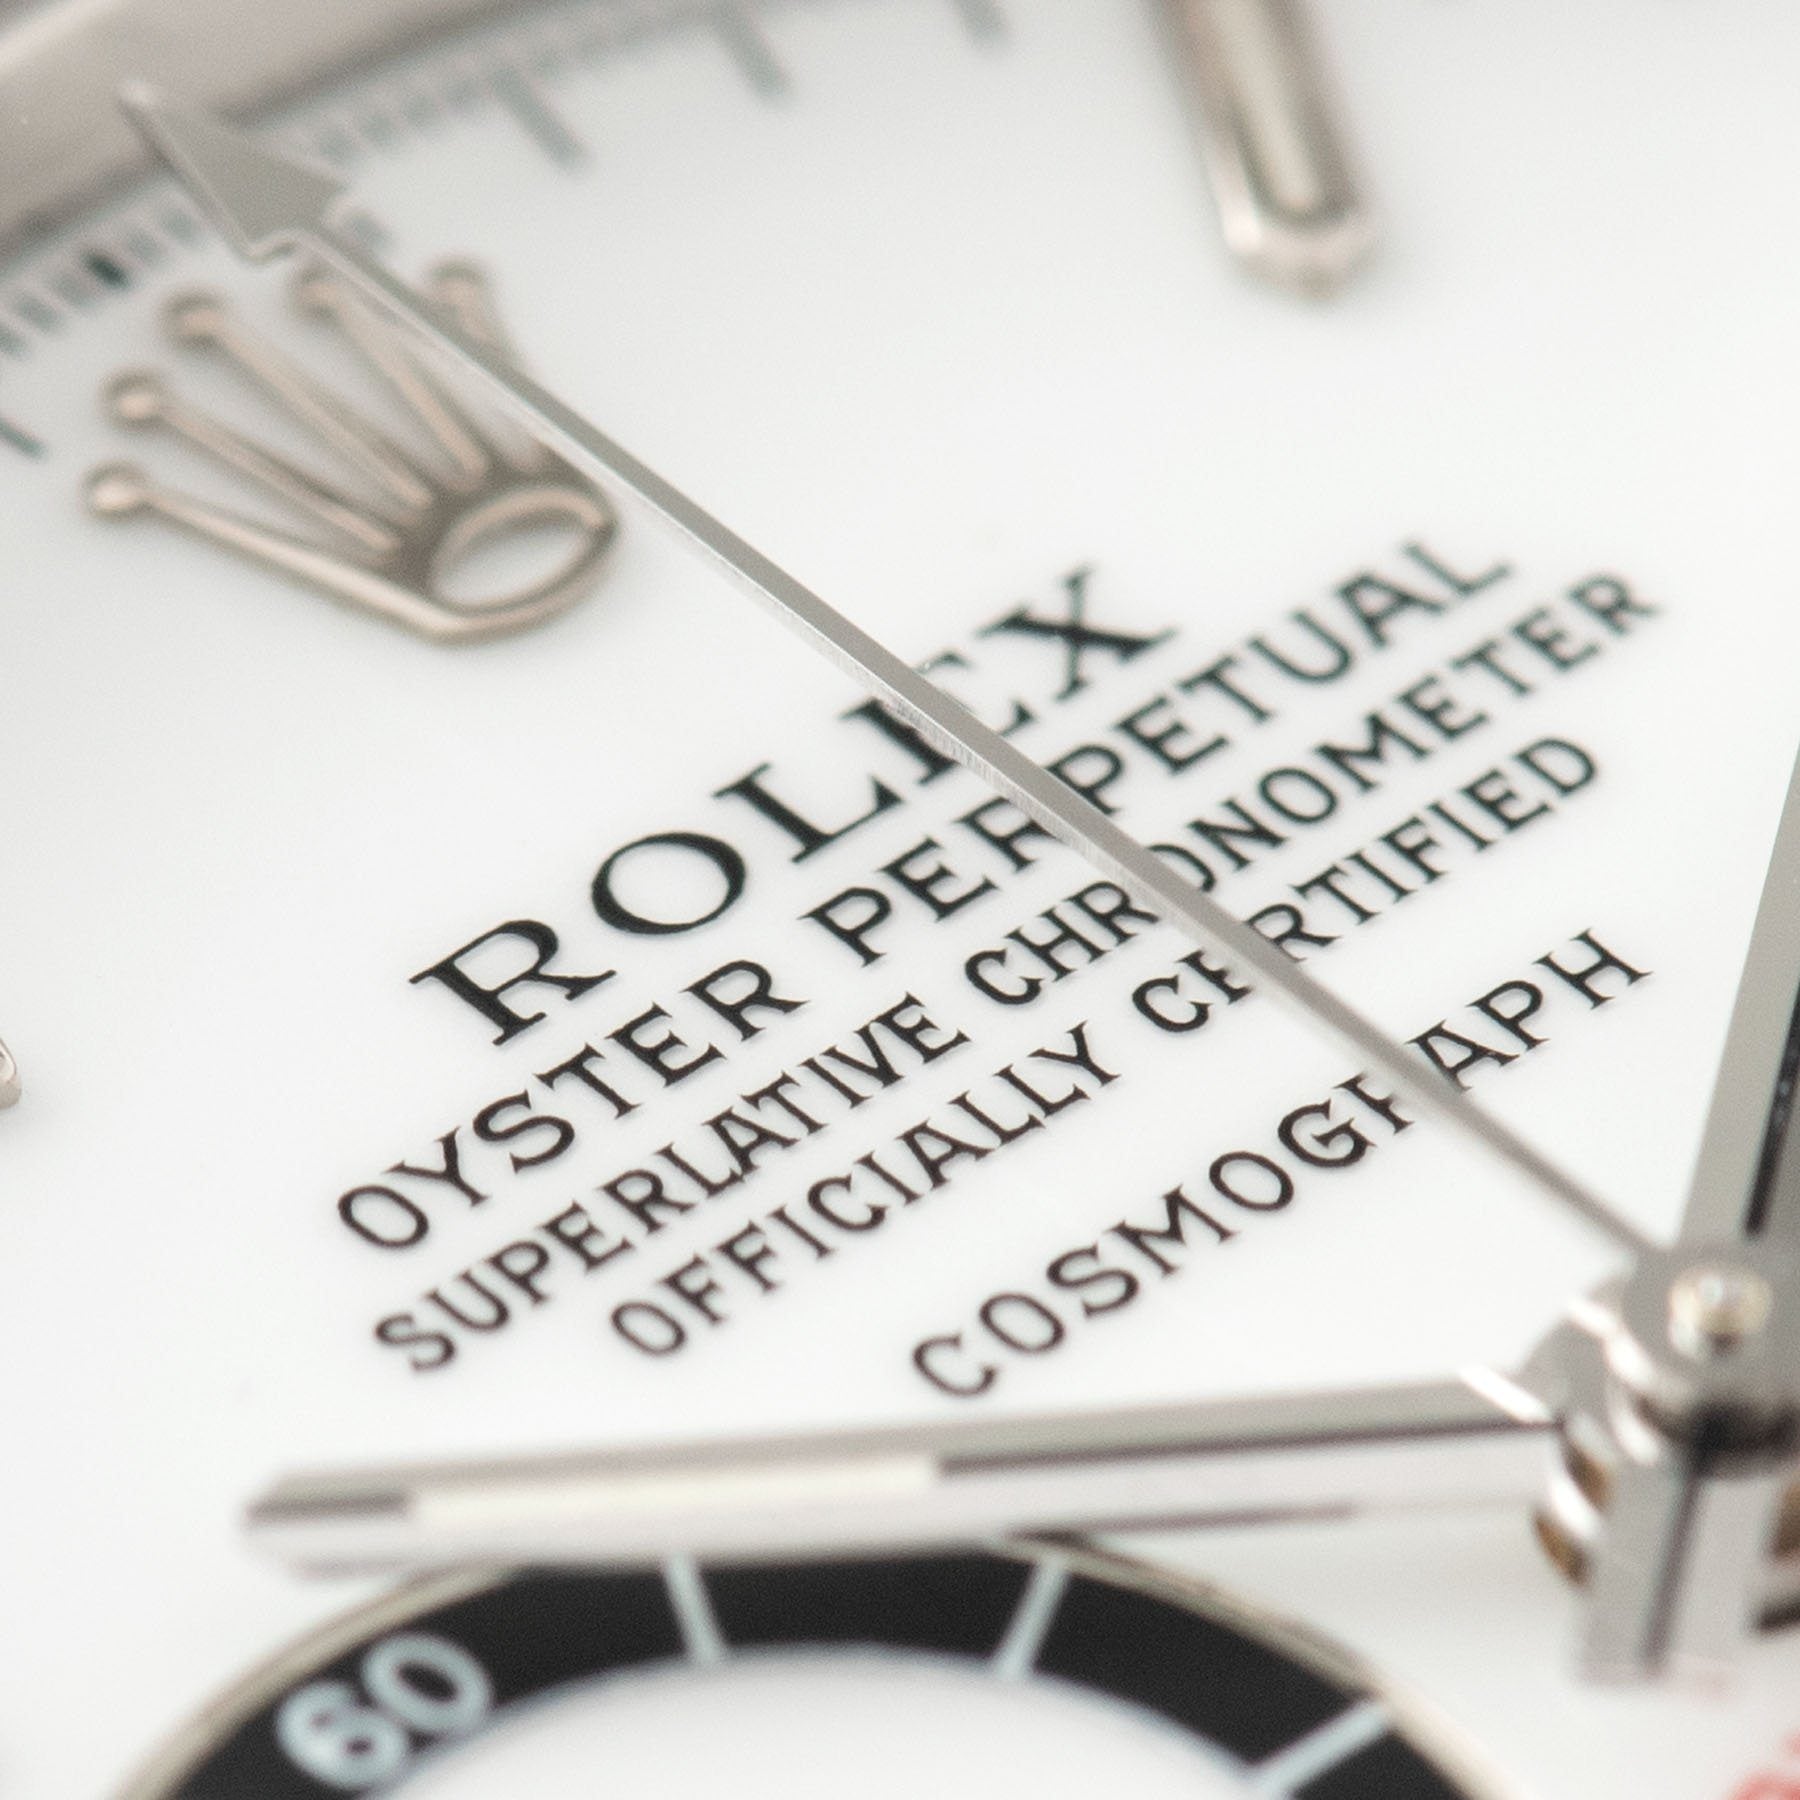 Rolex Daytona Steel 16520 Porcelain Mk1 Dial Box and Papers